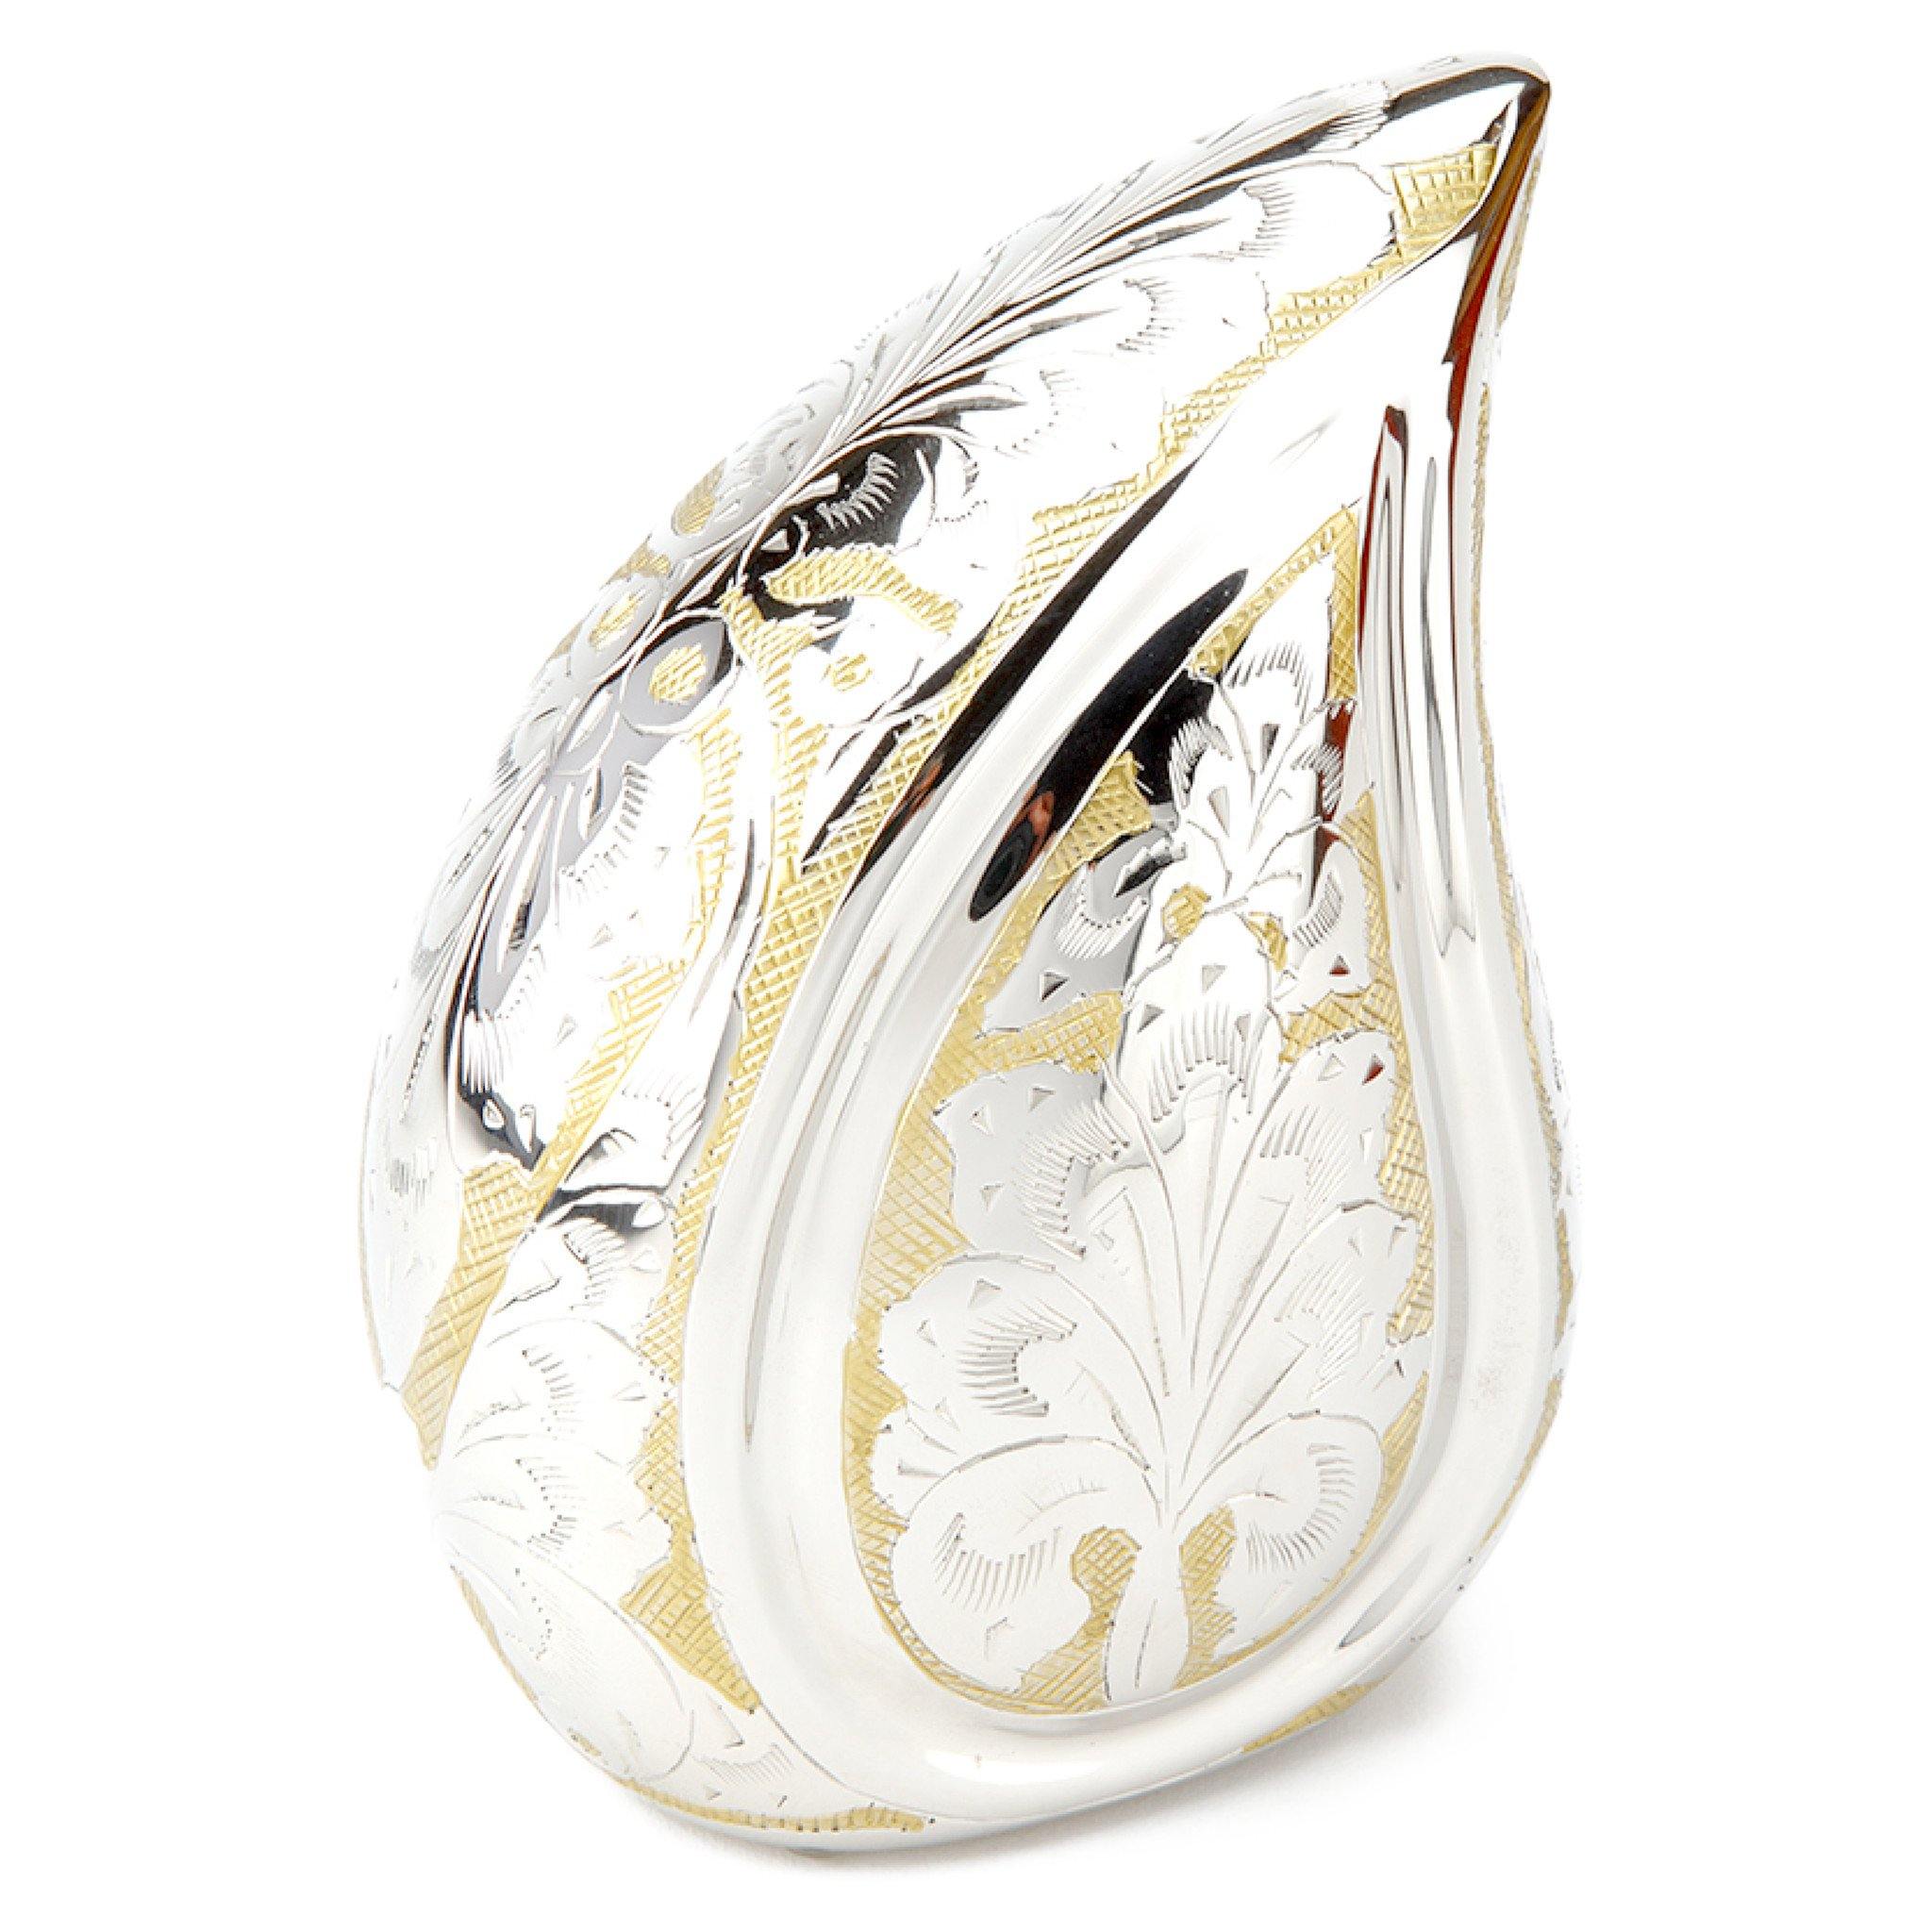 Torquay Teardrop Silver & Gold Engraved Cremation Ashes Urn RC